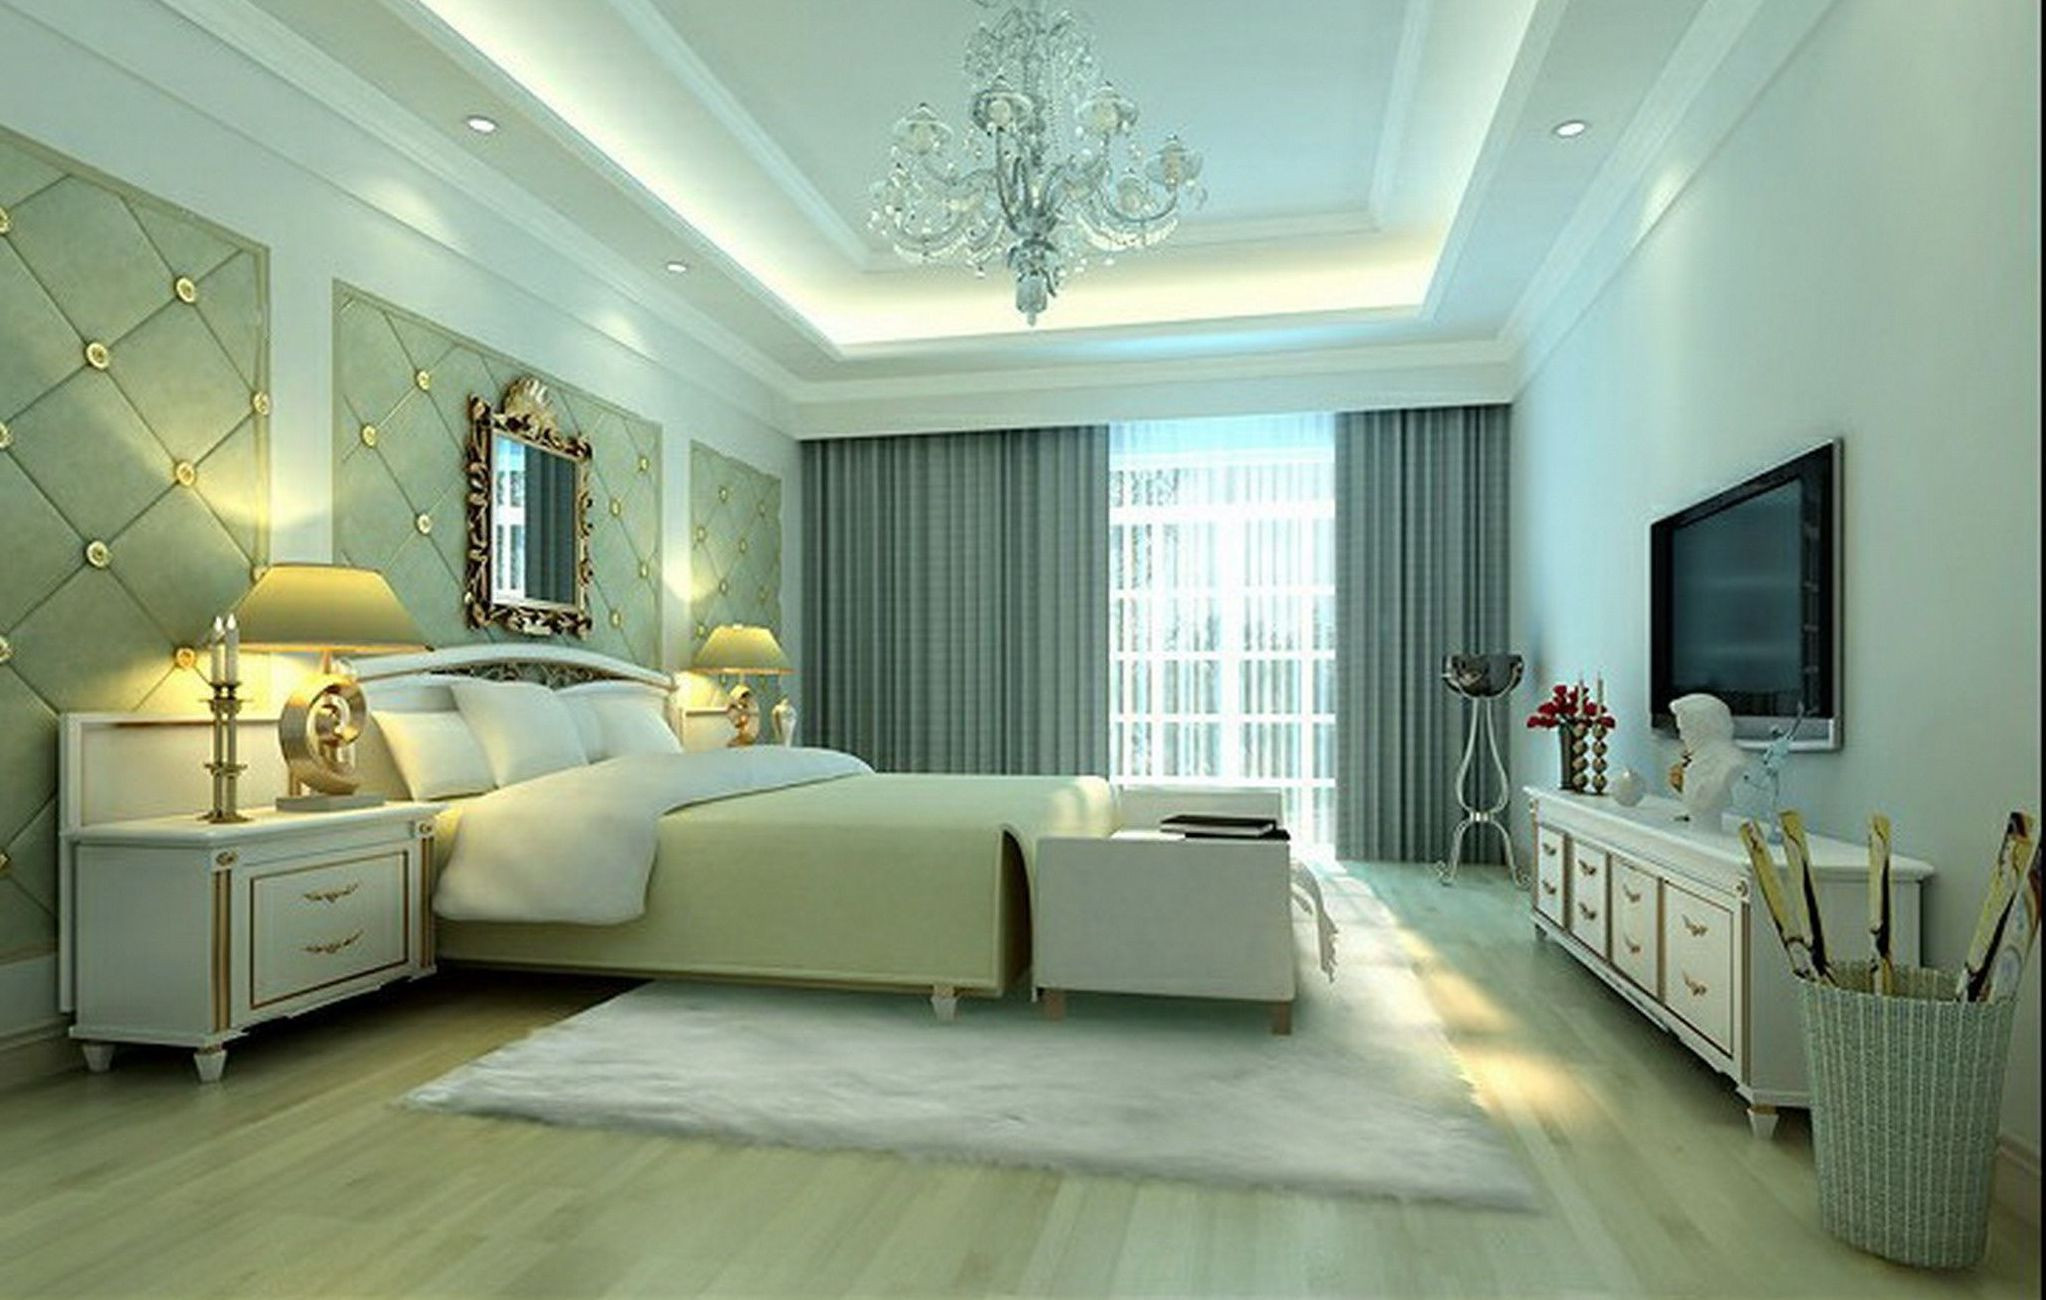 Bedroom Lighting Ideas Ceiling
 Ultimate Guide to Bedroom Ceiling Lights Traba Homes